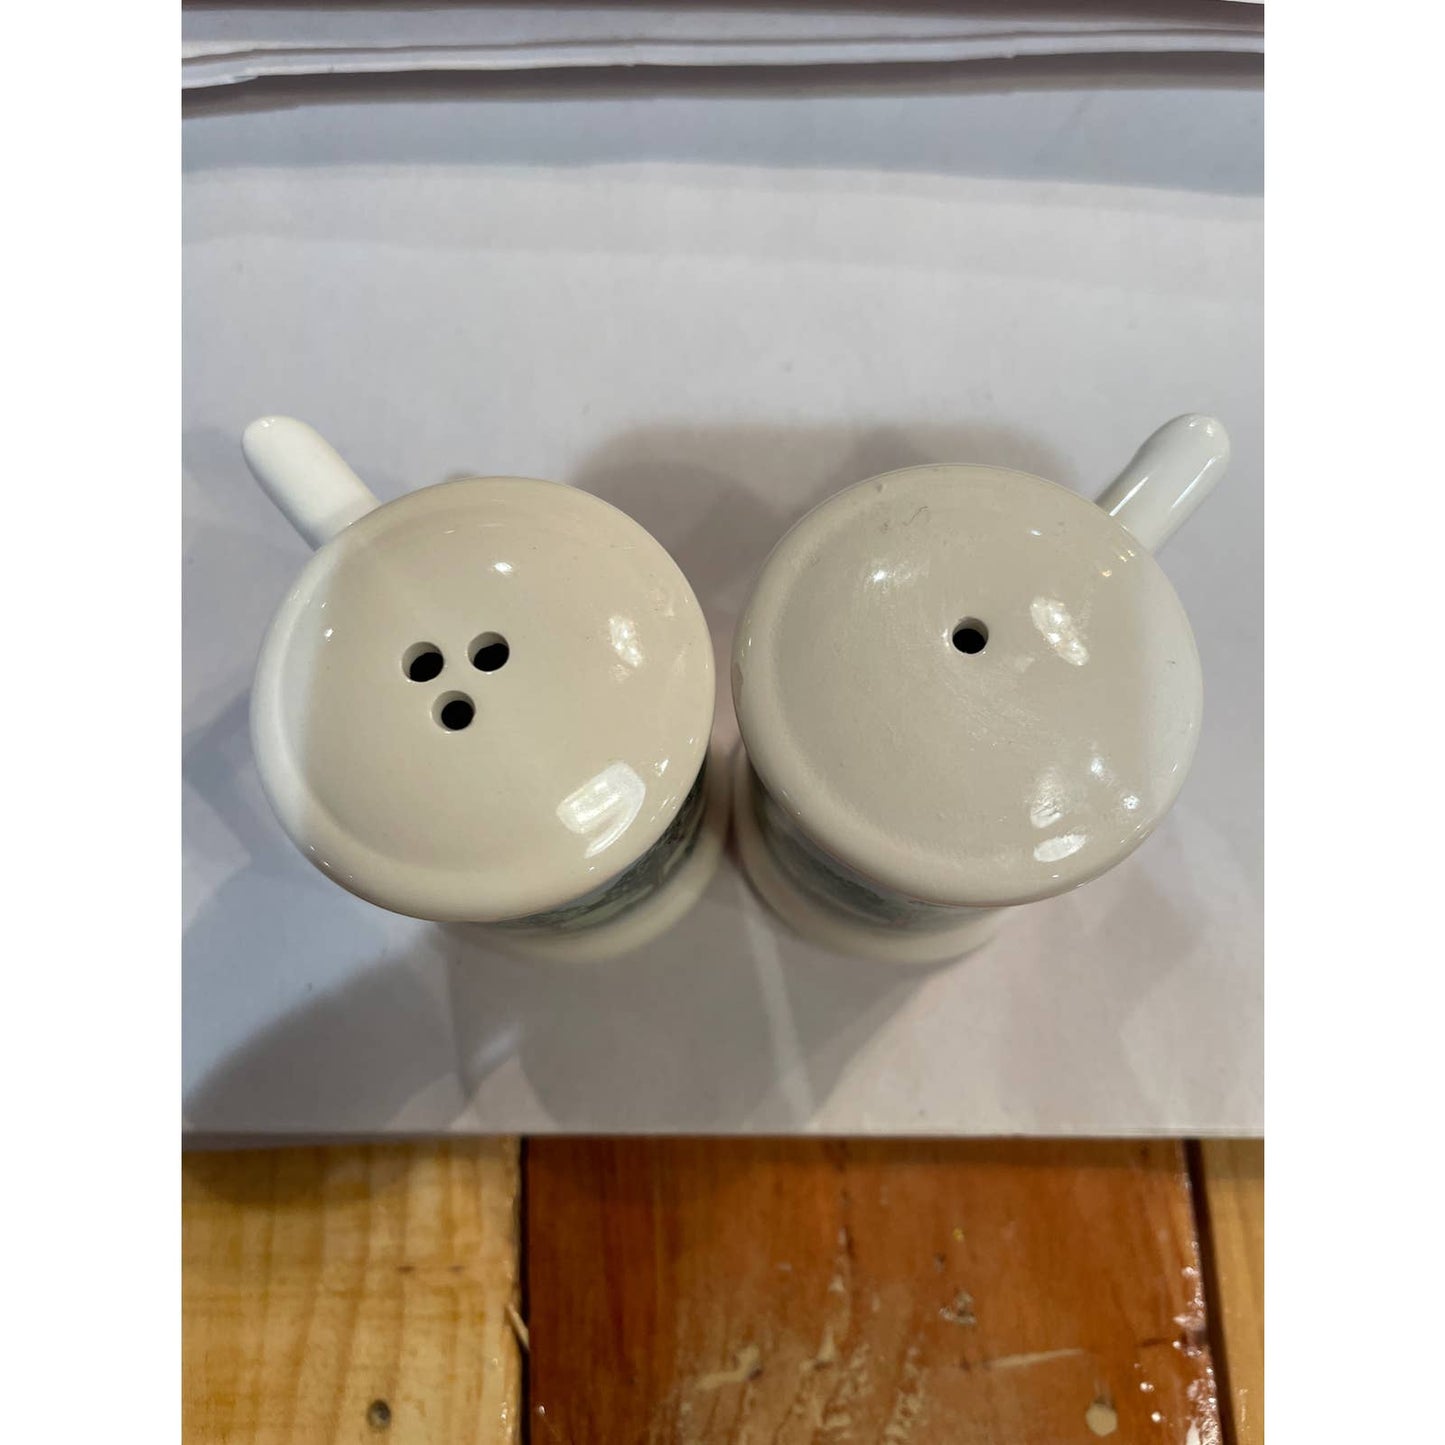 West Virginia “Country Roads Take Me Home” Salt & Pepper shakers